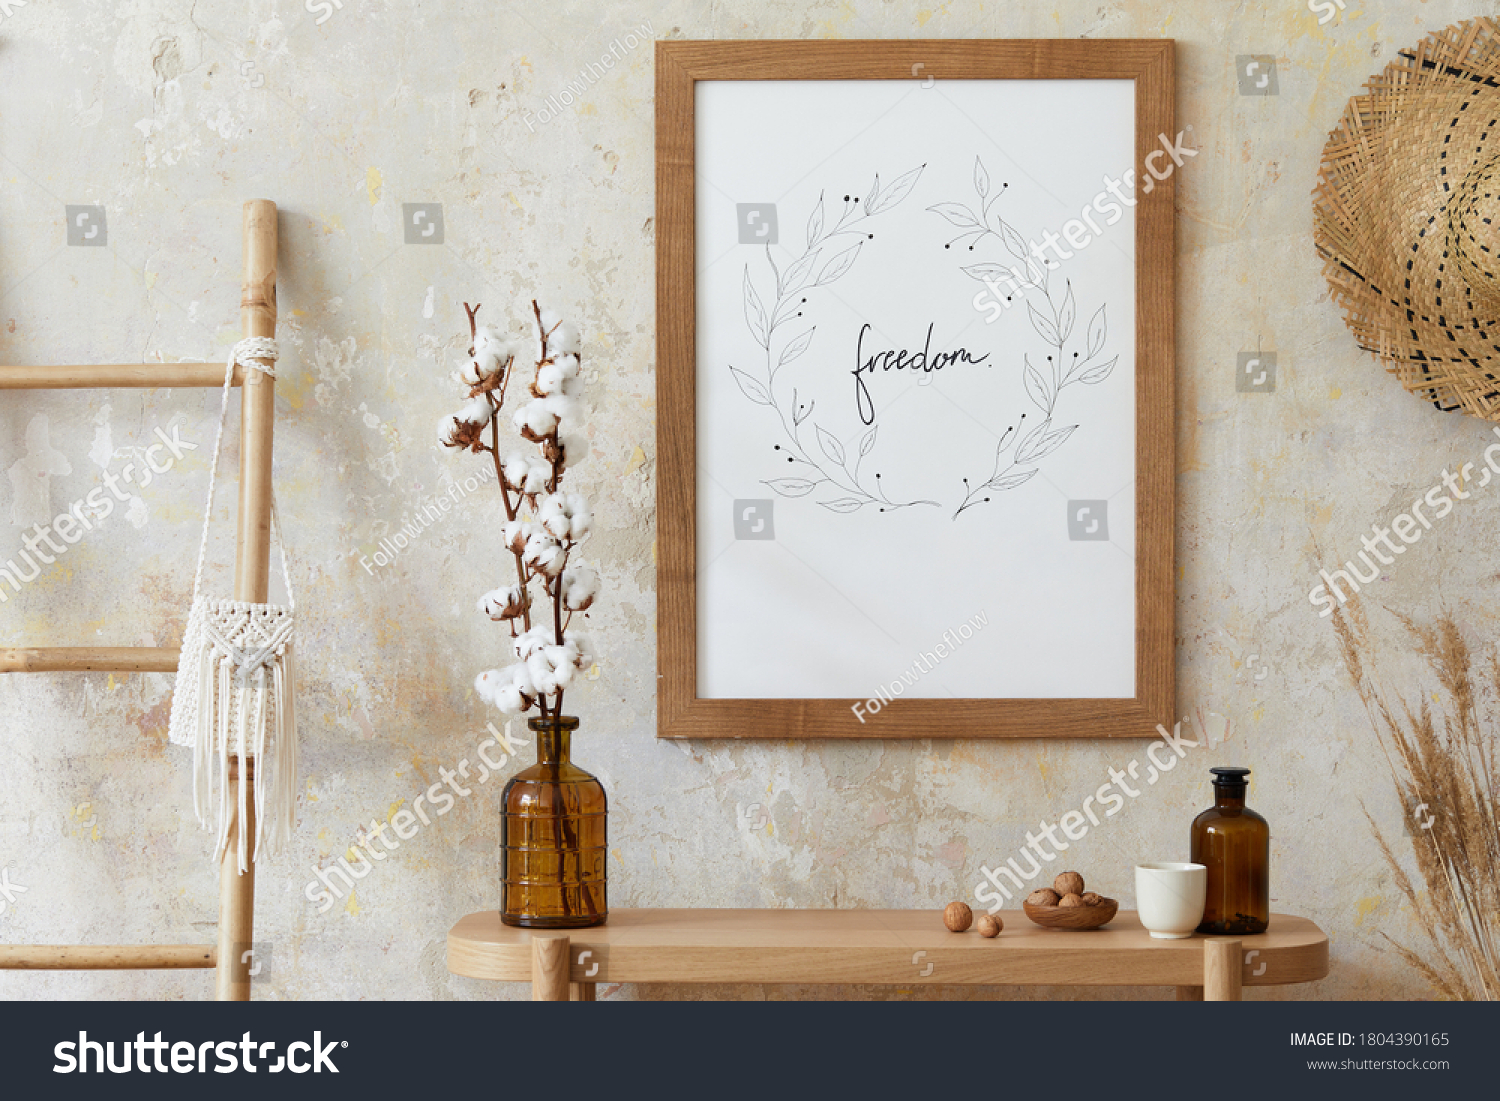 Beige boho interior of living room with mock up poster frame, elegant accessories, dried flowers in vase, wooden console and hanging rattan hut in stylish home decor. Template. #1804390165